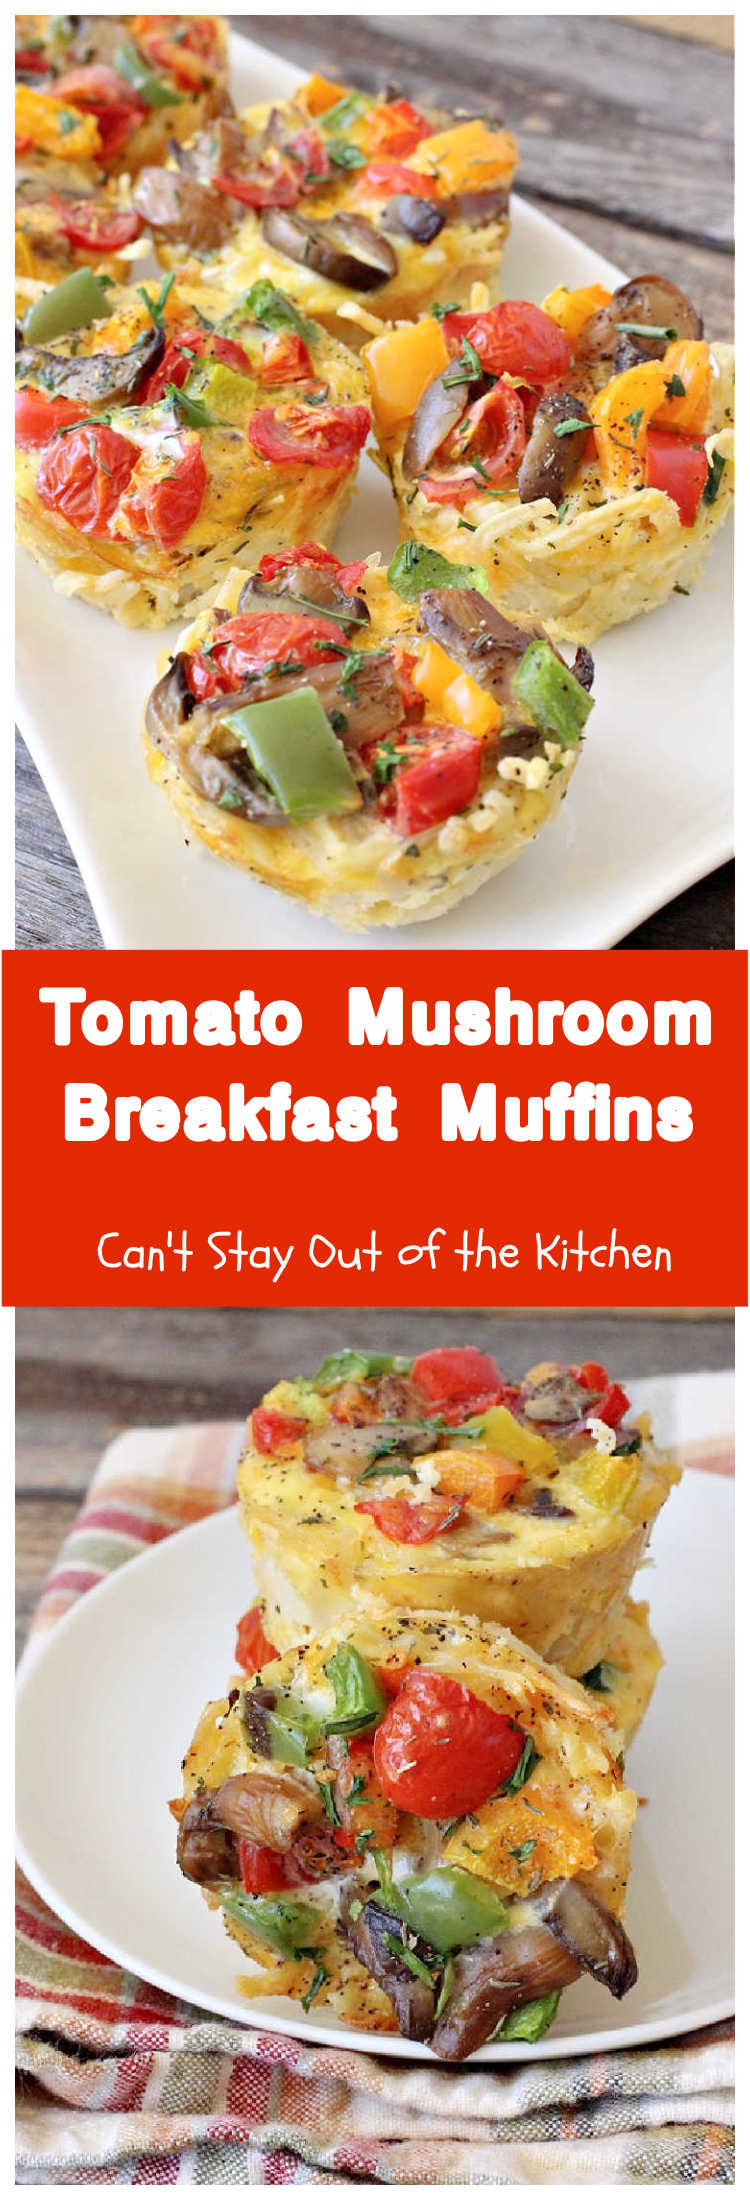 Tomato Mushroom Breakfast Muffins | Can't Stay Out of the Kitchen | these fabulous #vegetarian #breakfast #muffins are the perfect choice for any breakfast, especially the #holidays. Can freeze and microwave for a quick & #healthy breakfast meal, too. #tomatoes #mushrooms #GlutenFree #potatoes #BreakfastMuffins #TomatoMushroomBreakfastMuffins